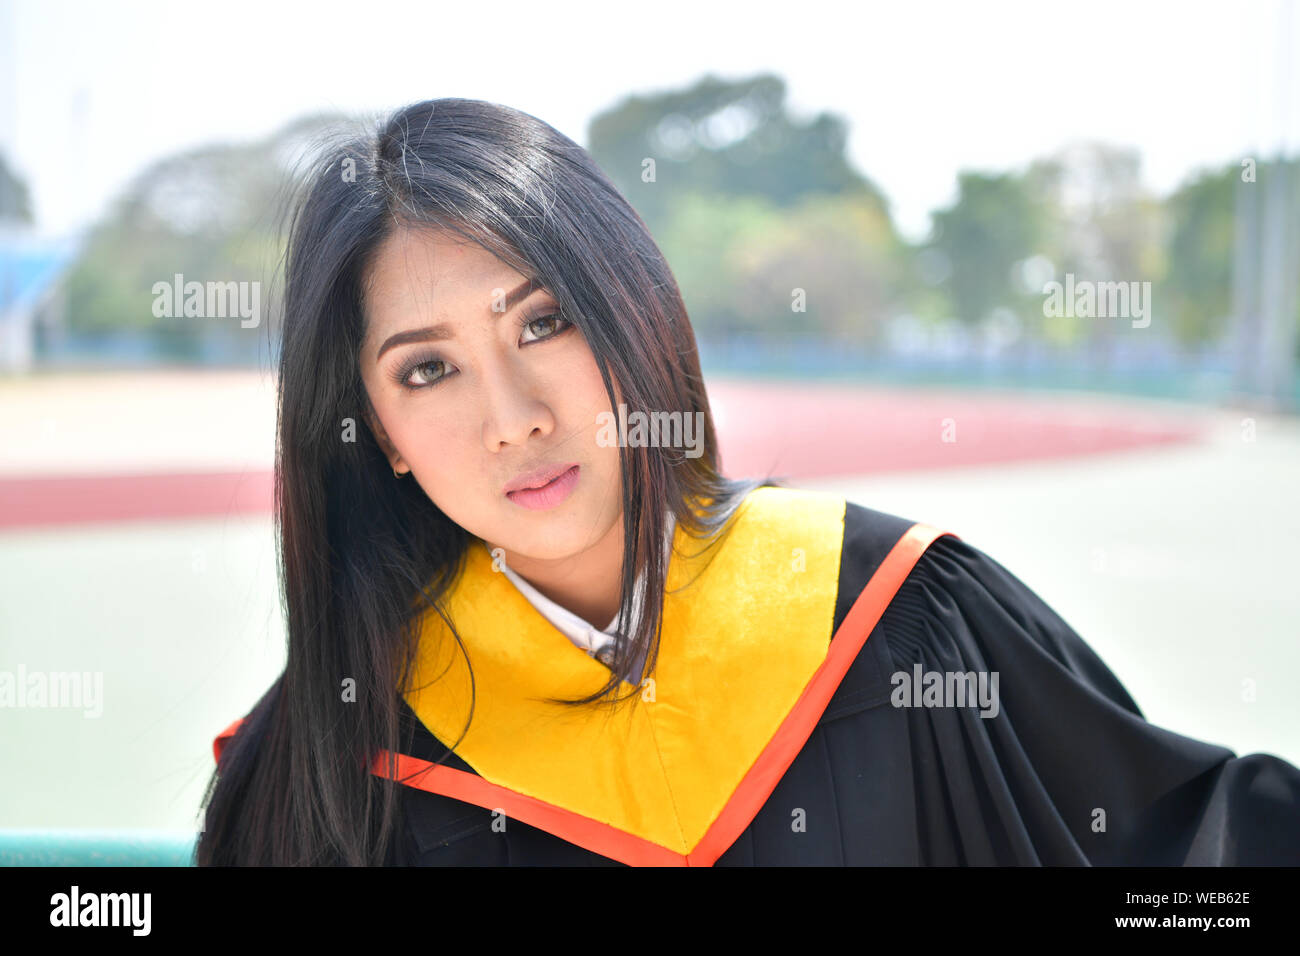 Portrait Of Beautiful Young Woman In Graduation Gown Stock Photo